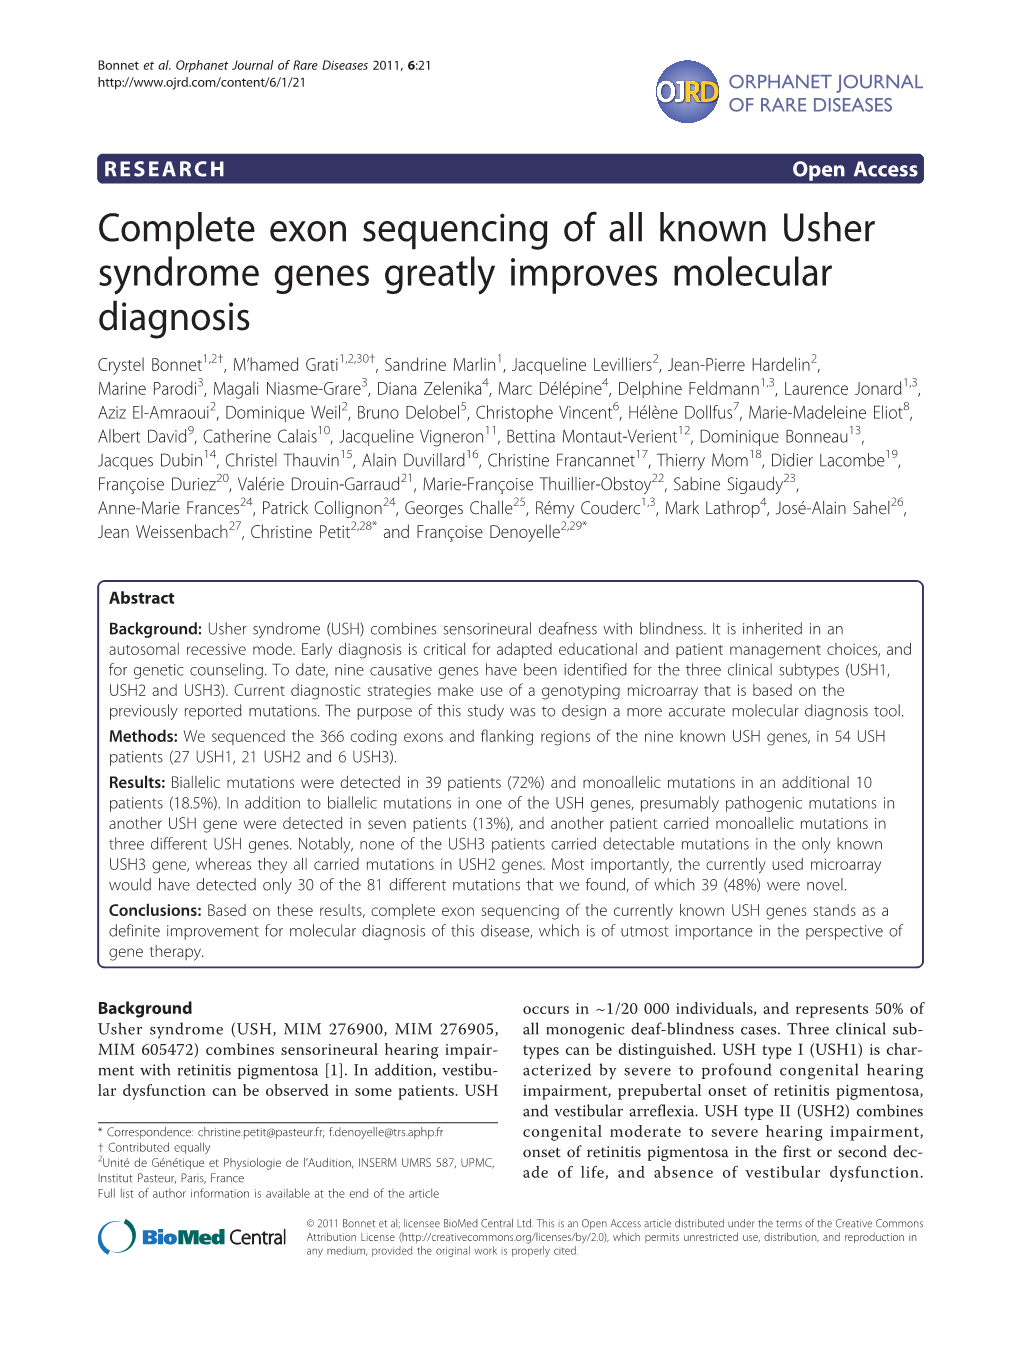 Complete Exon Sequencing of All Known Usher Syndrome Genes